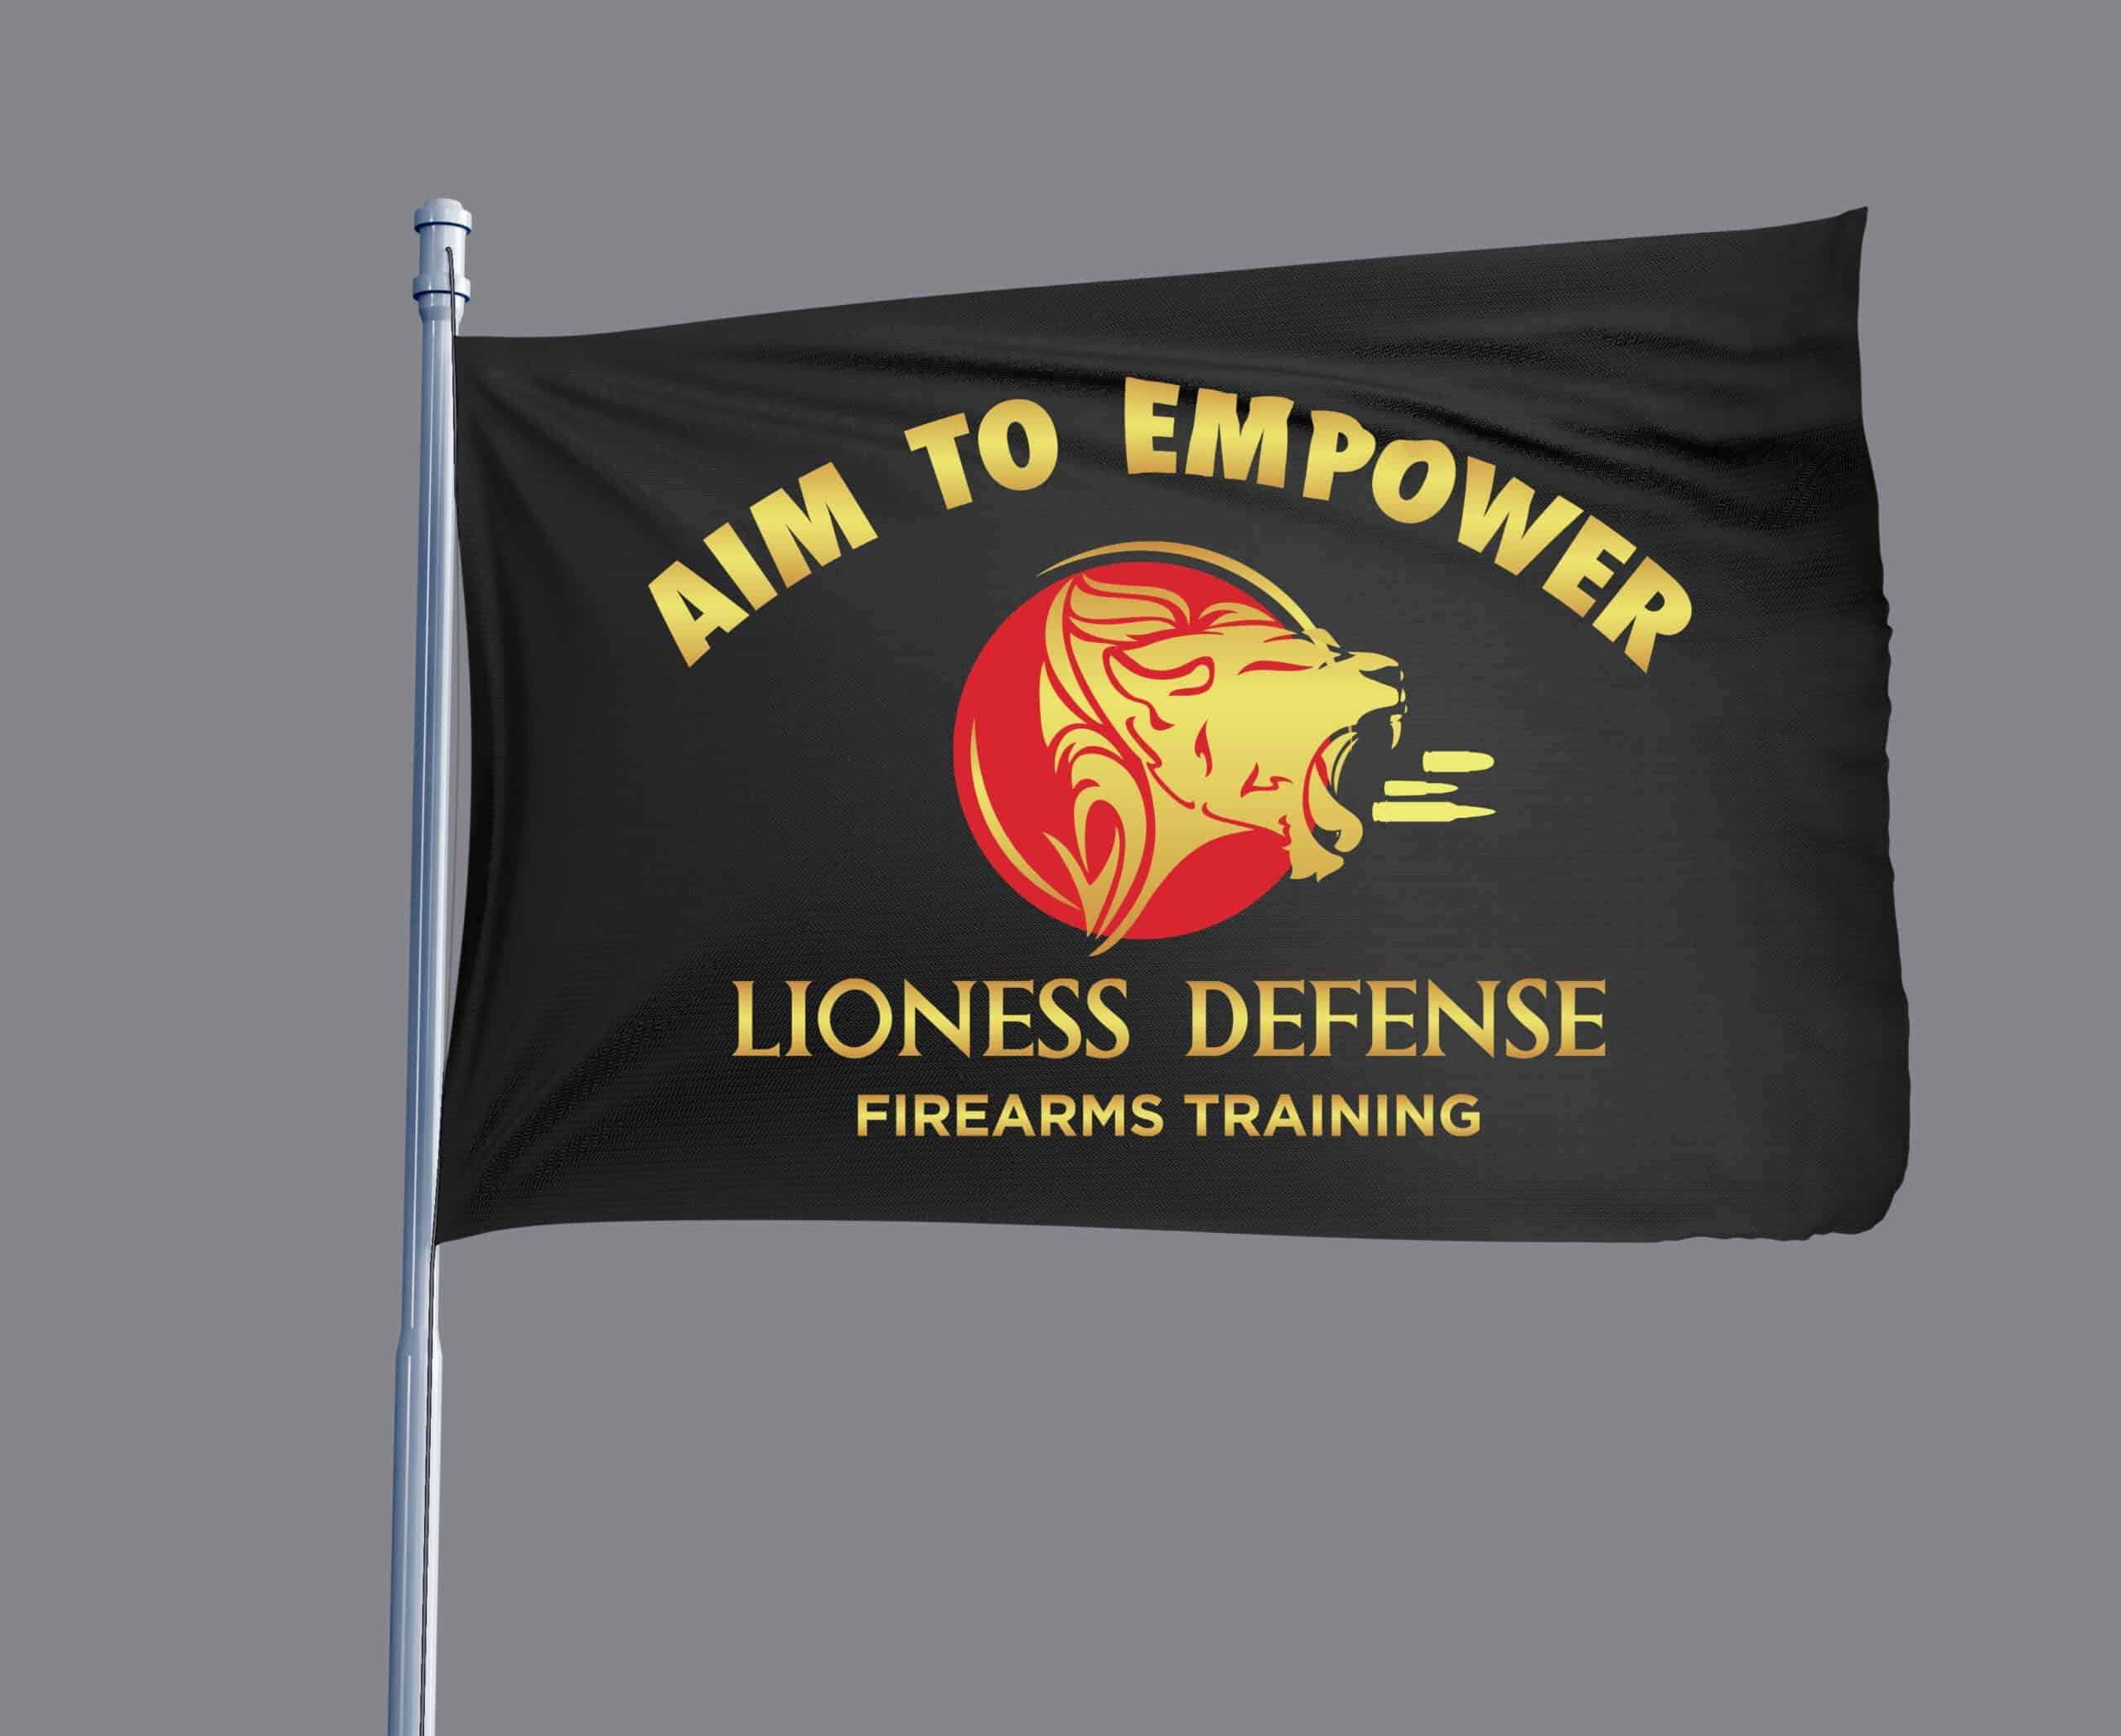 Custom business flags, company flags with your logo from DeSigns, Inc.